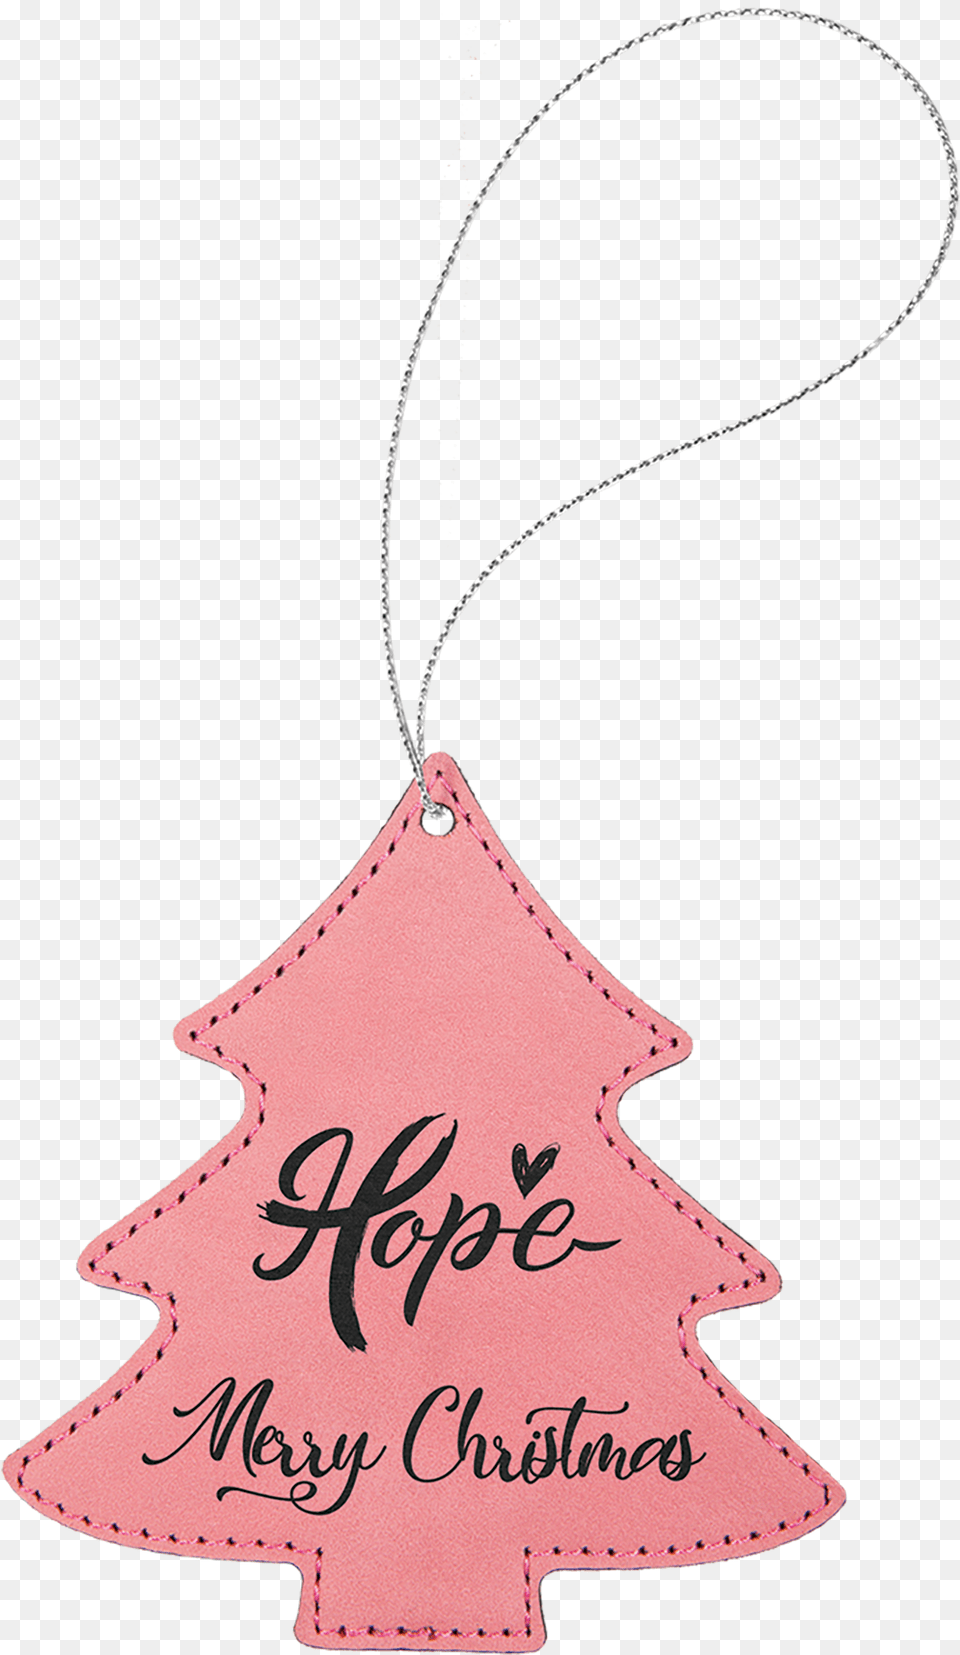 Leather Christmas Tree Ornaments, Accessories, Jewelry, Necklace Png